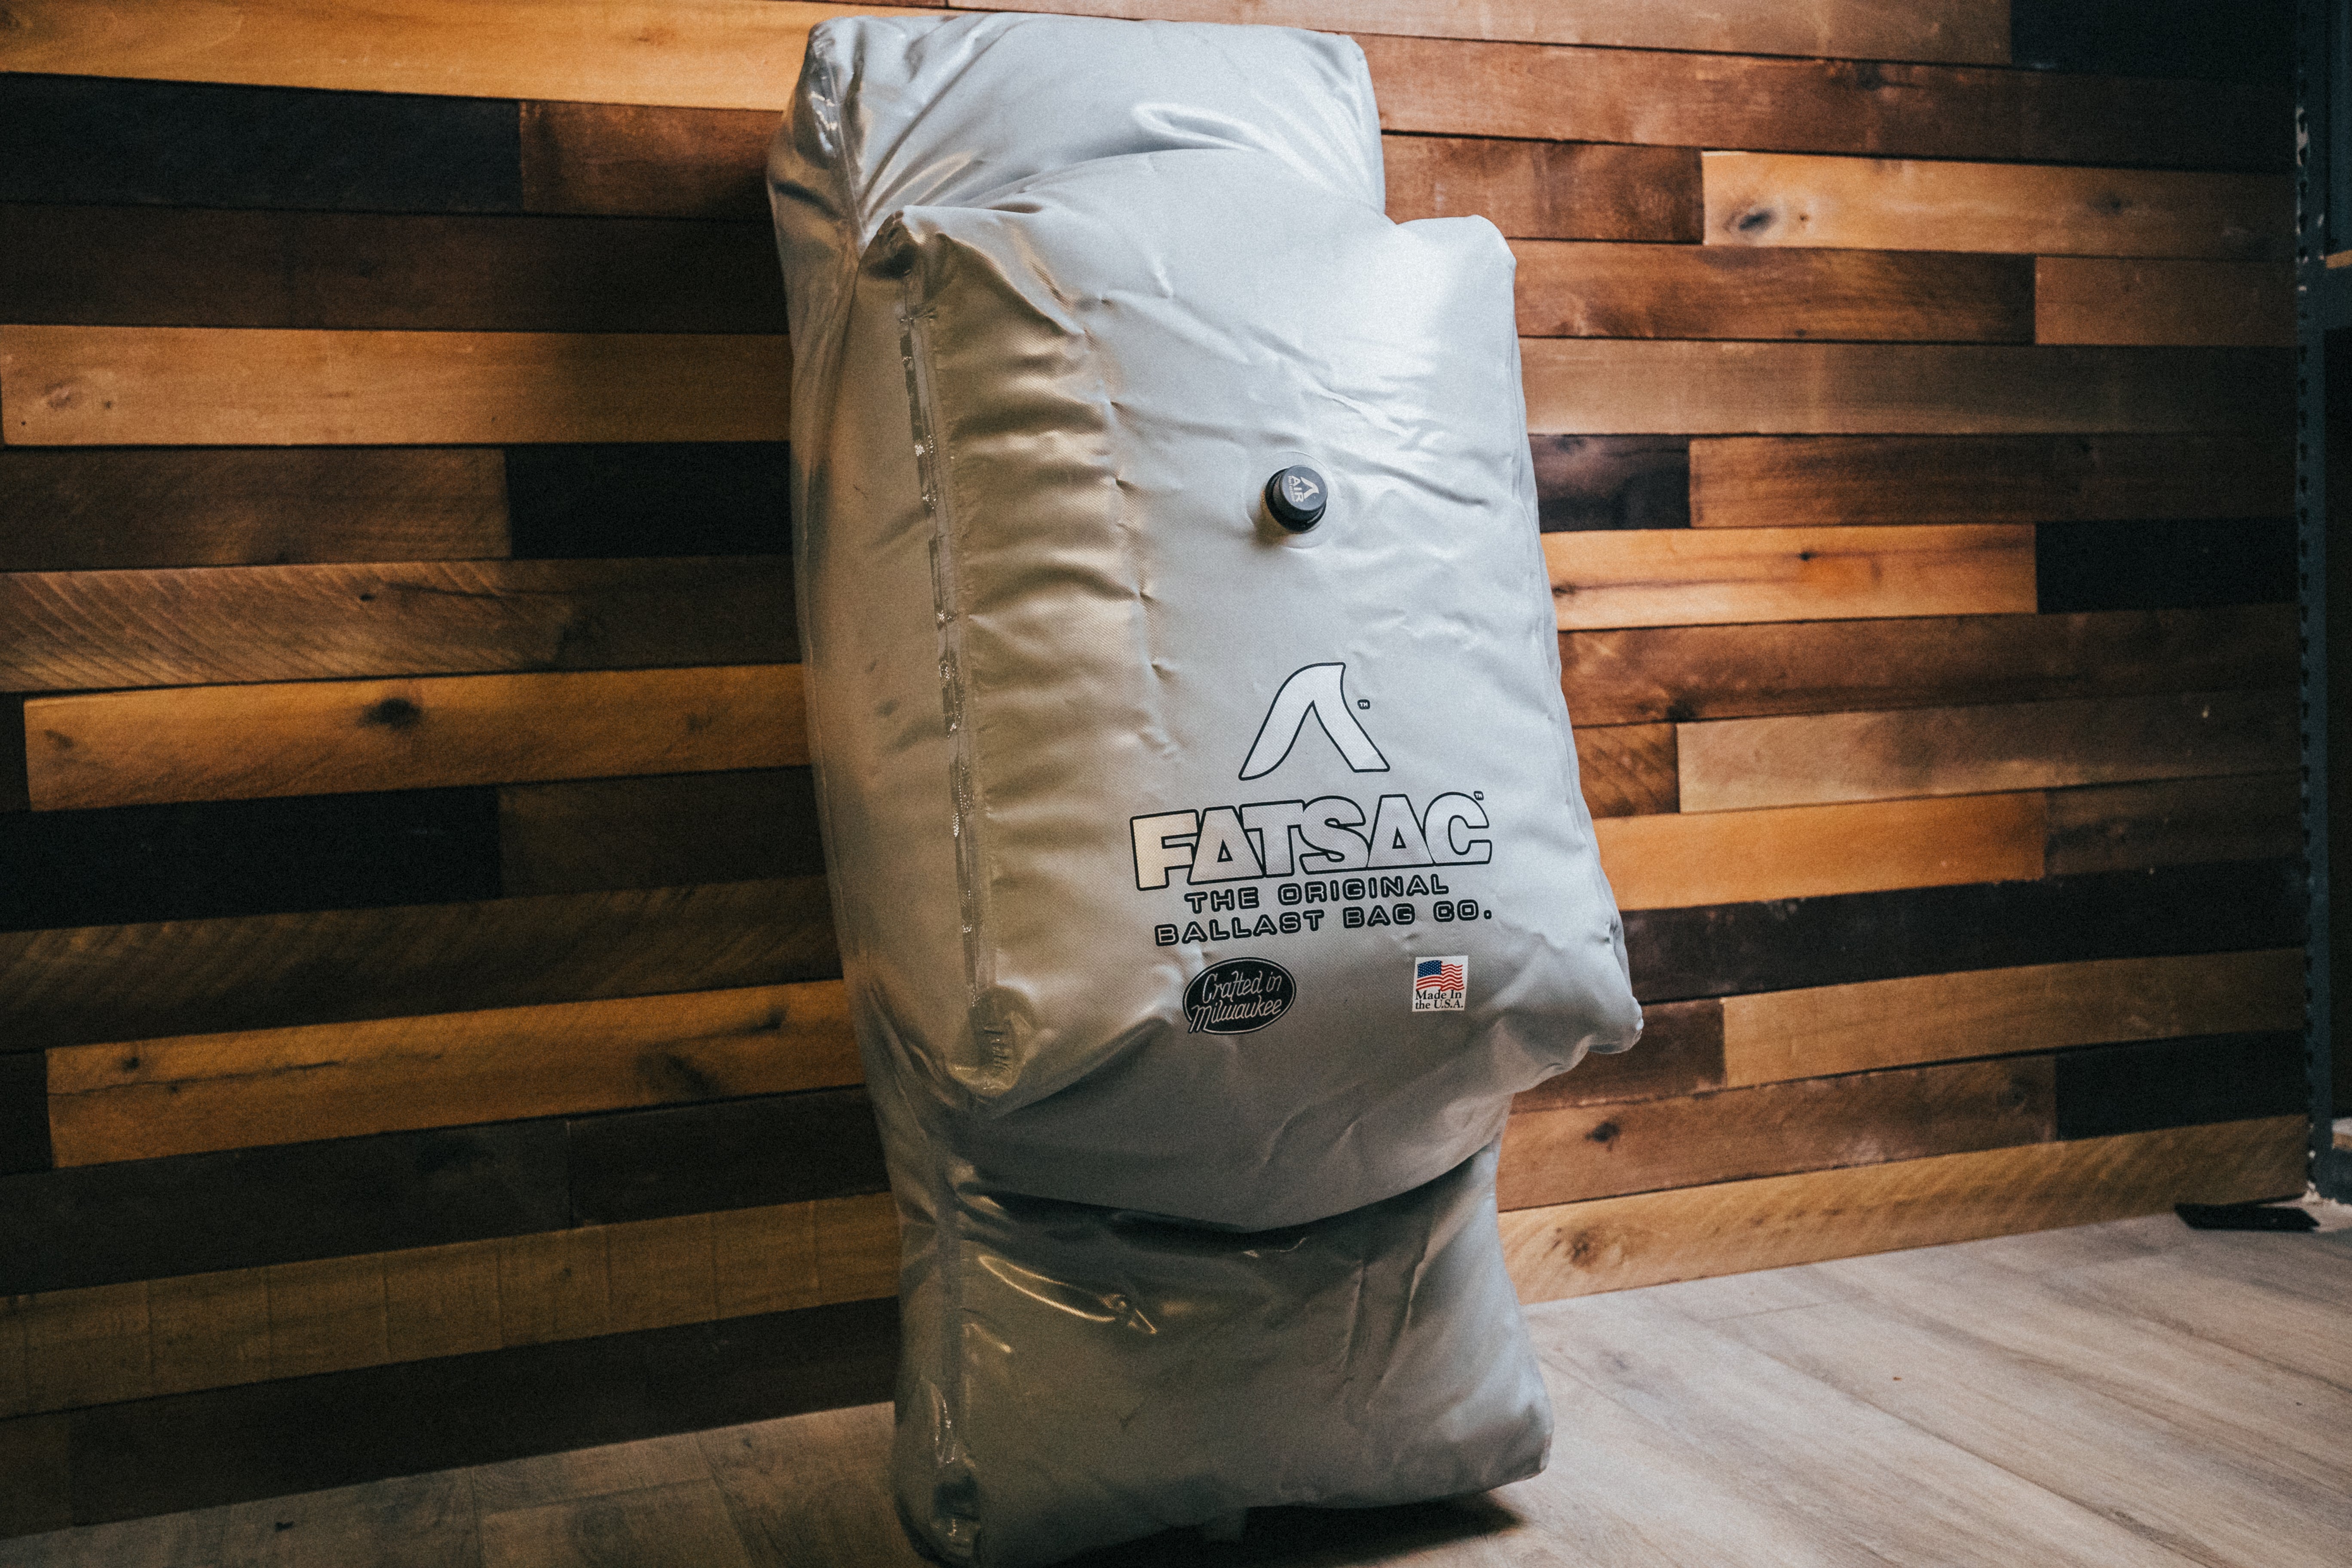 Bigger Surf Waves & Wakes with Ballast Bags By FatSac